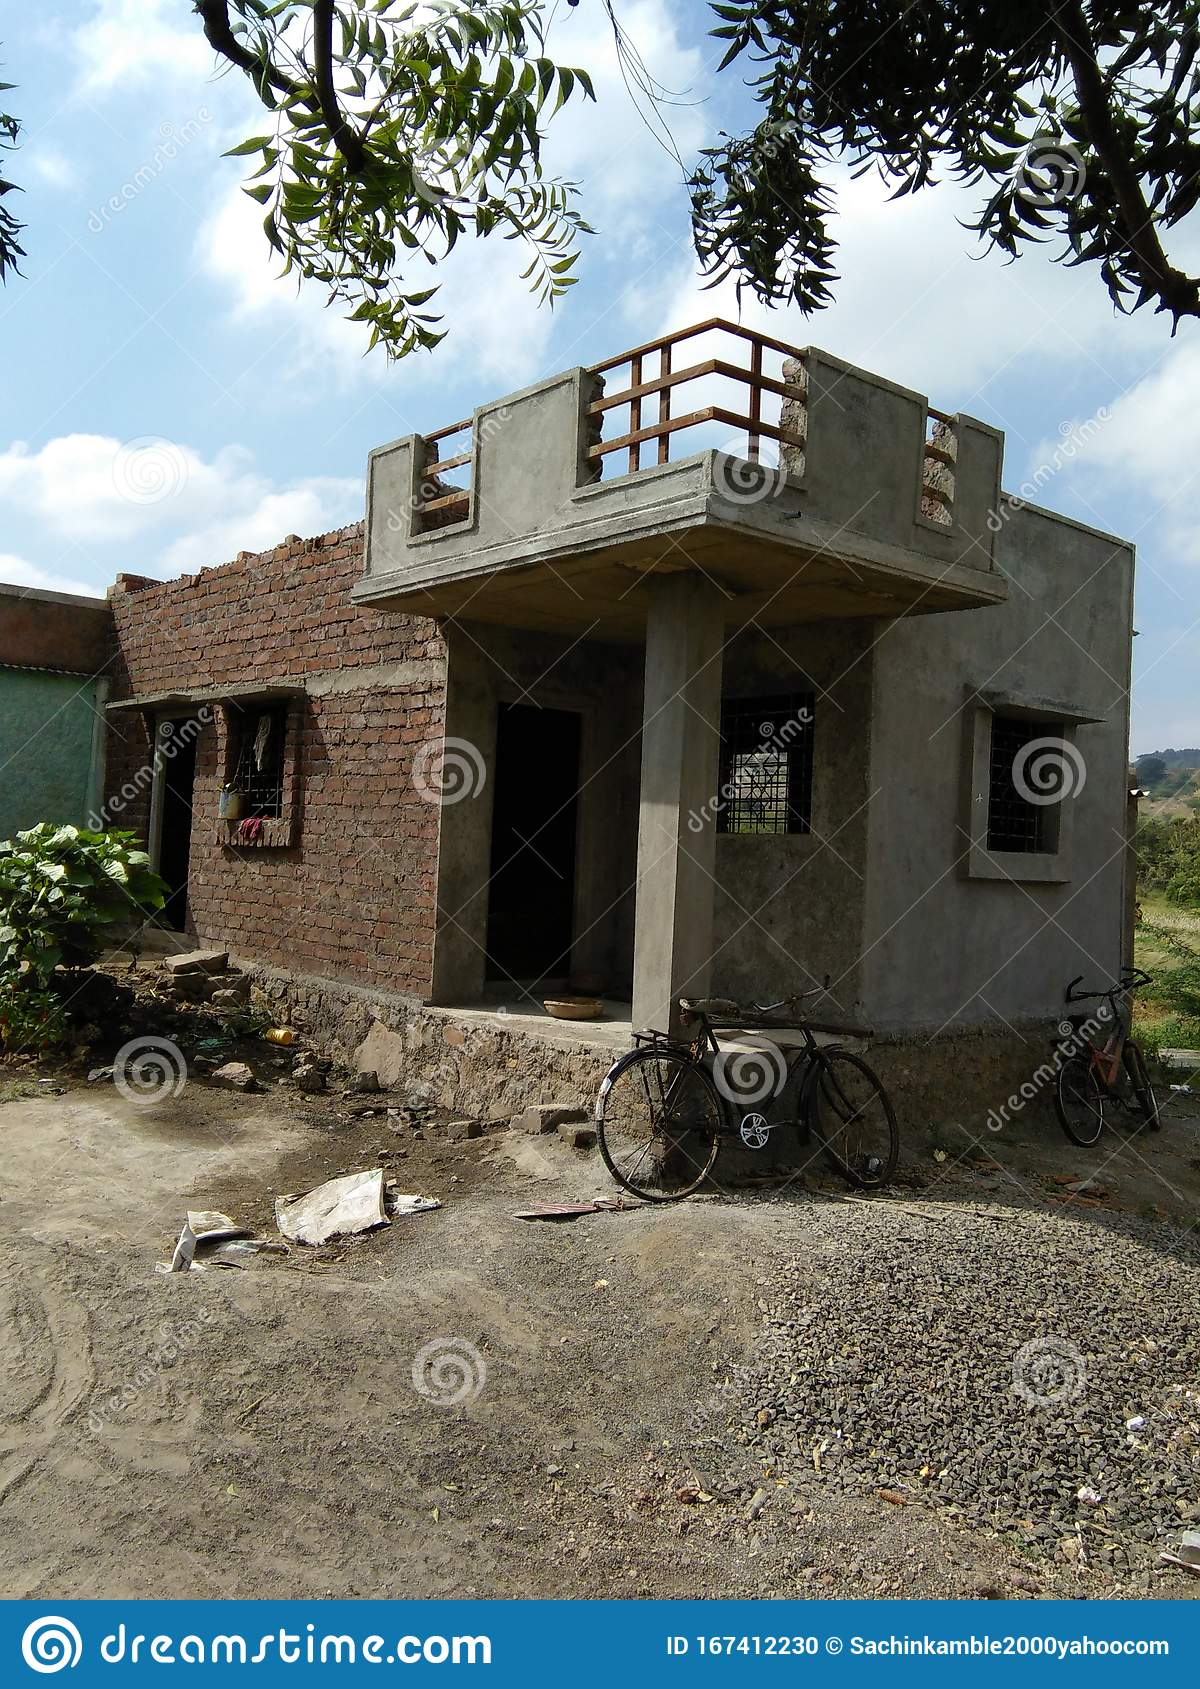 pic of beautiful house in village